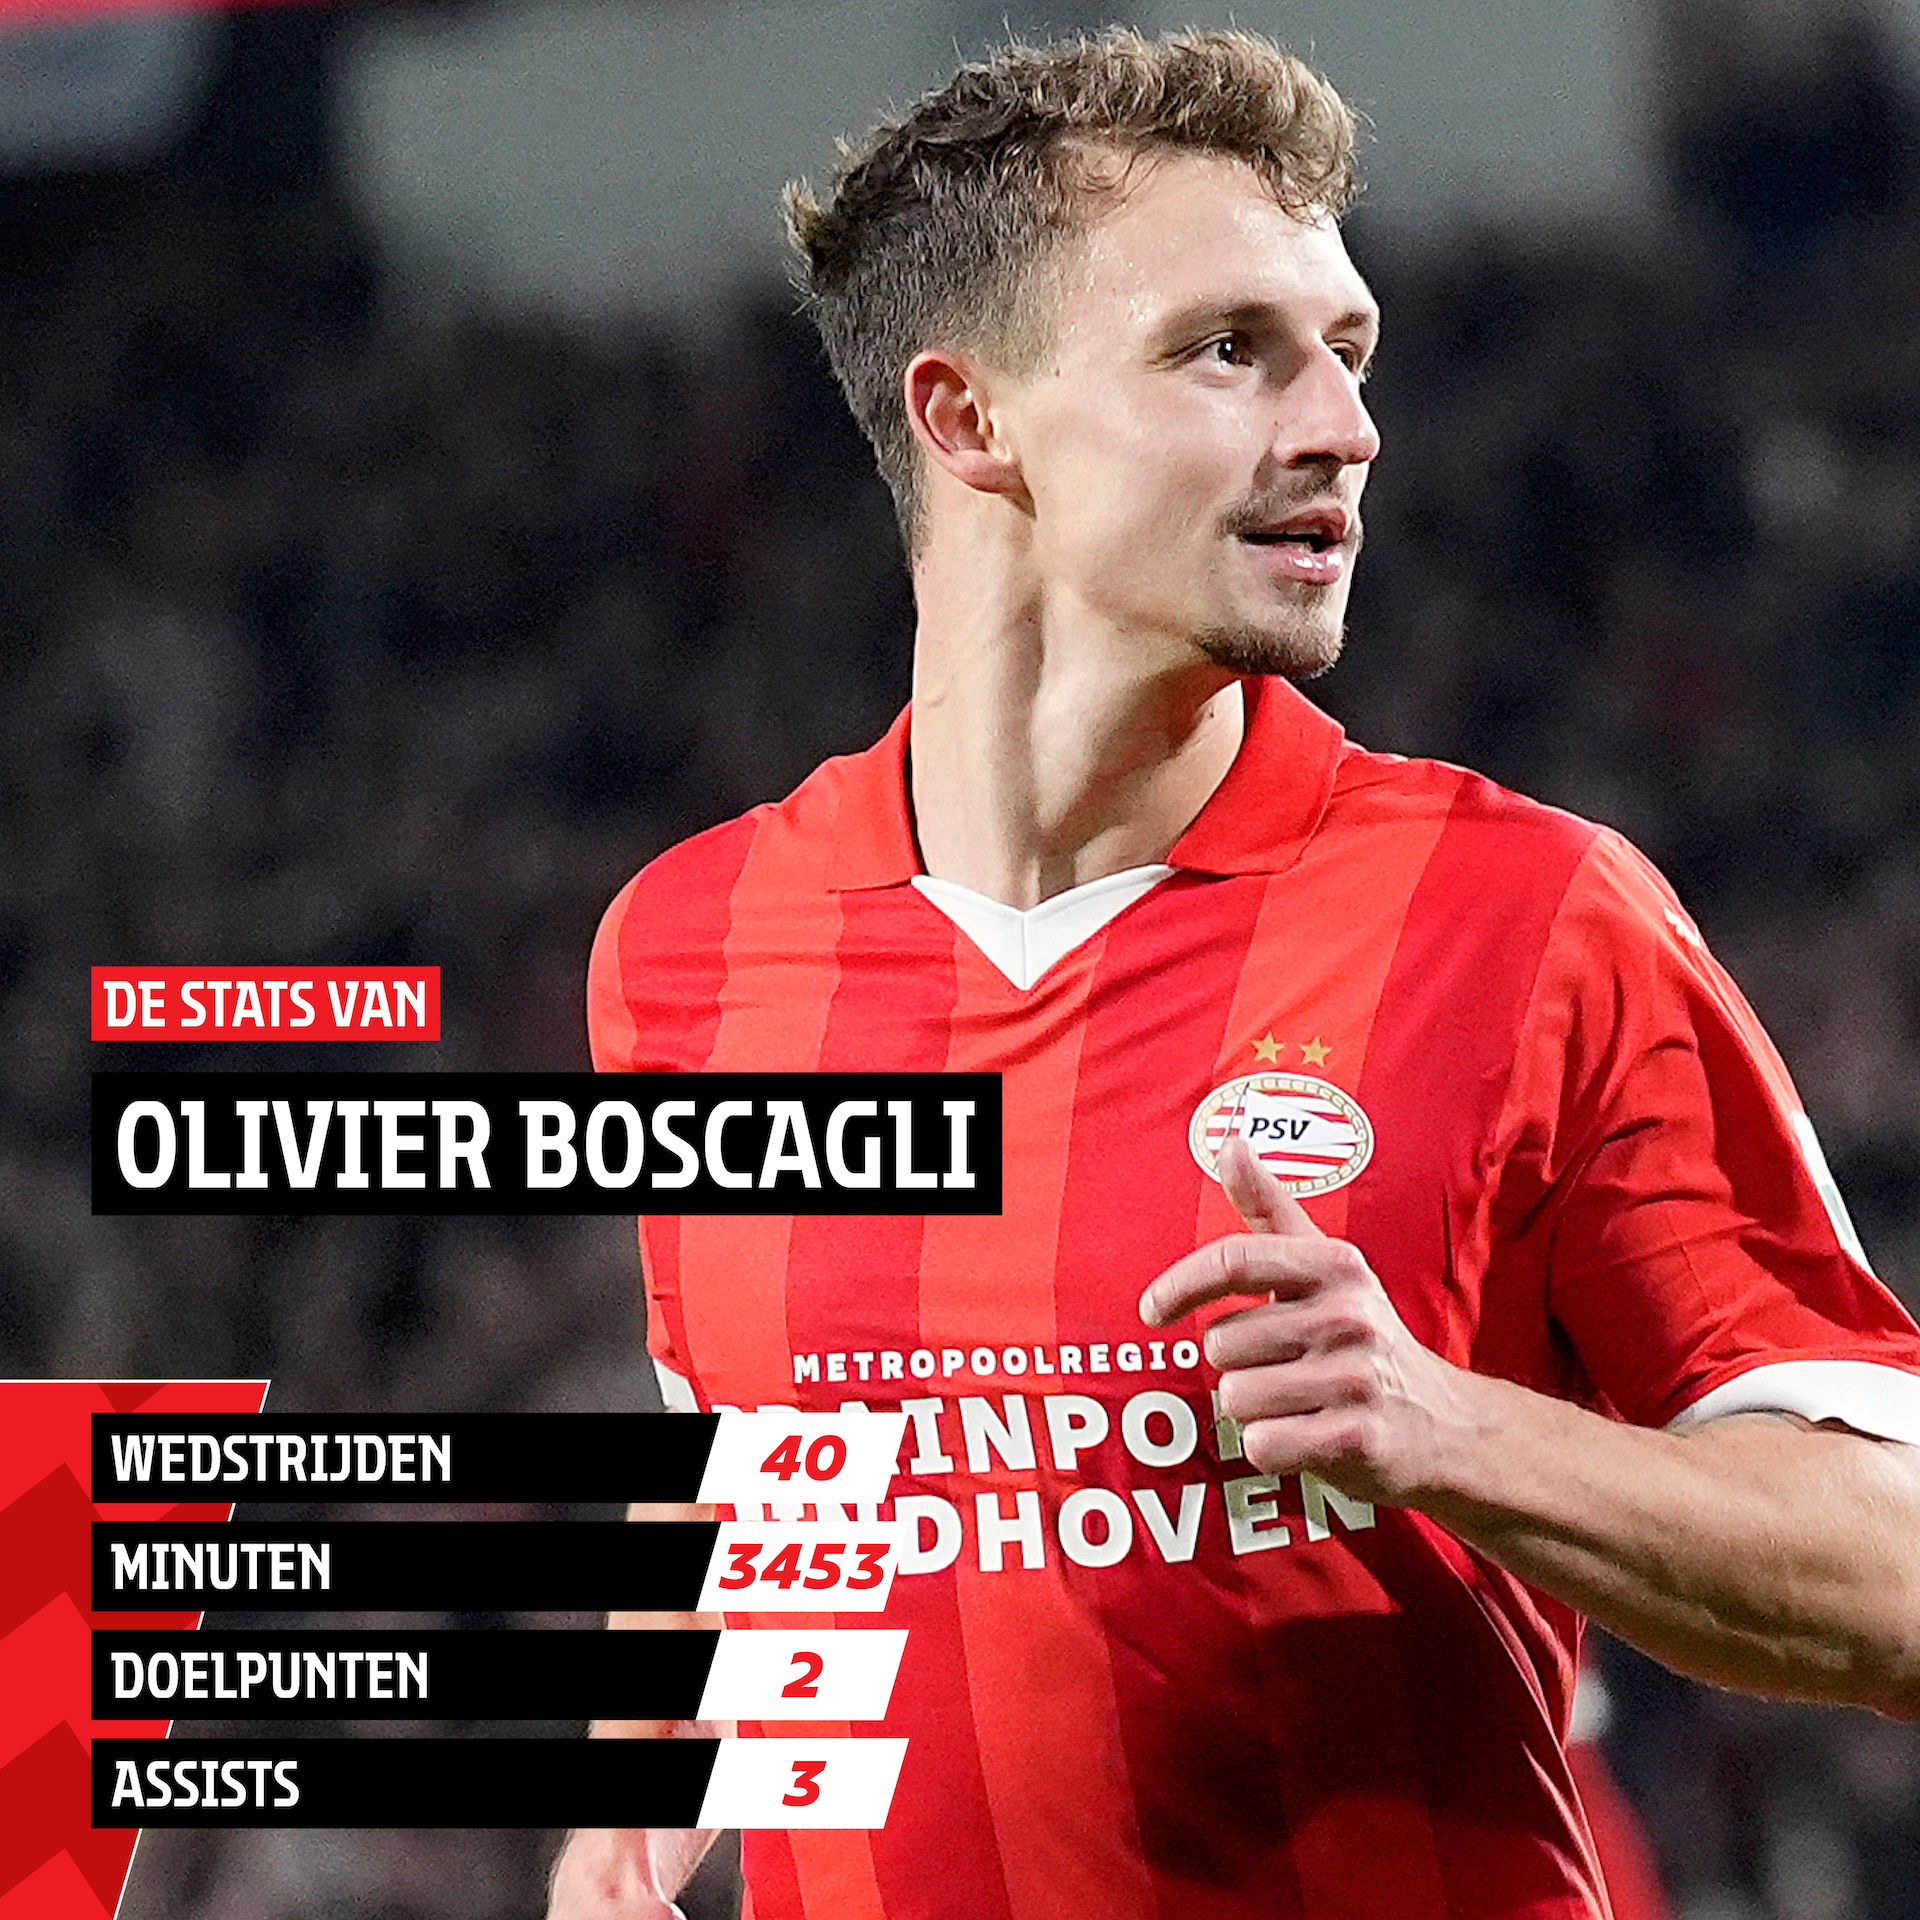 Olivier Boscagli made the most minutes of any field player this season 